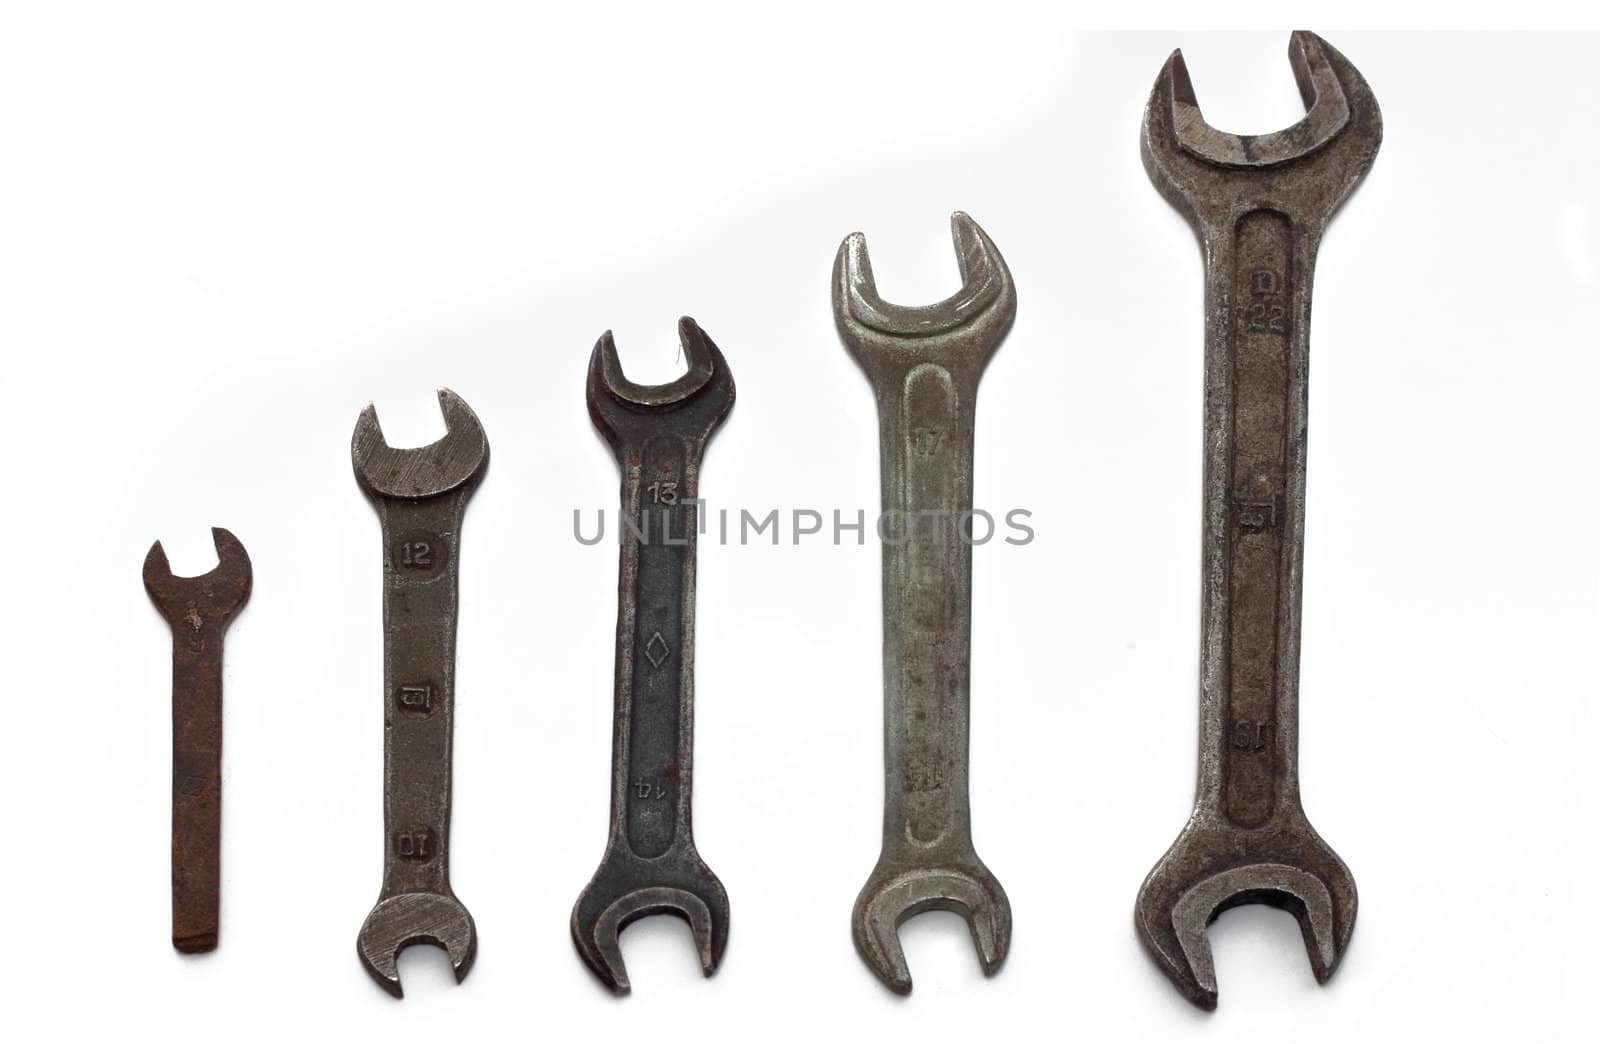 Wrenches by AGorohov